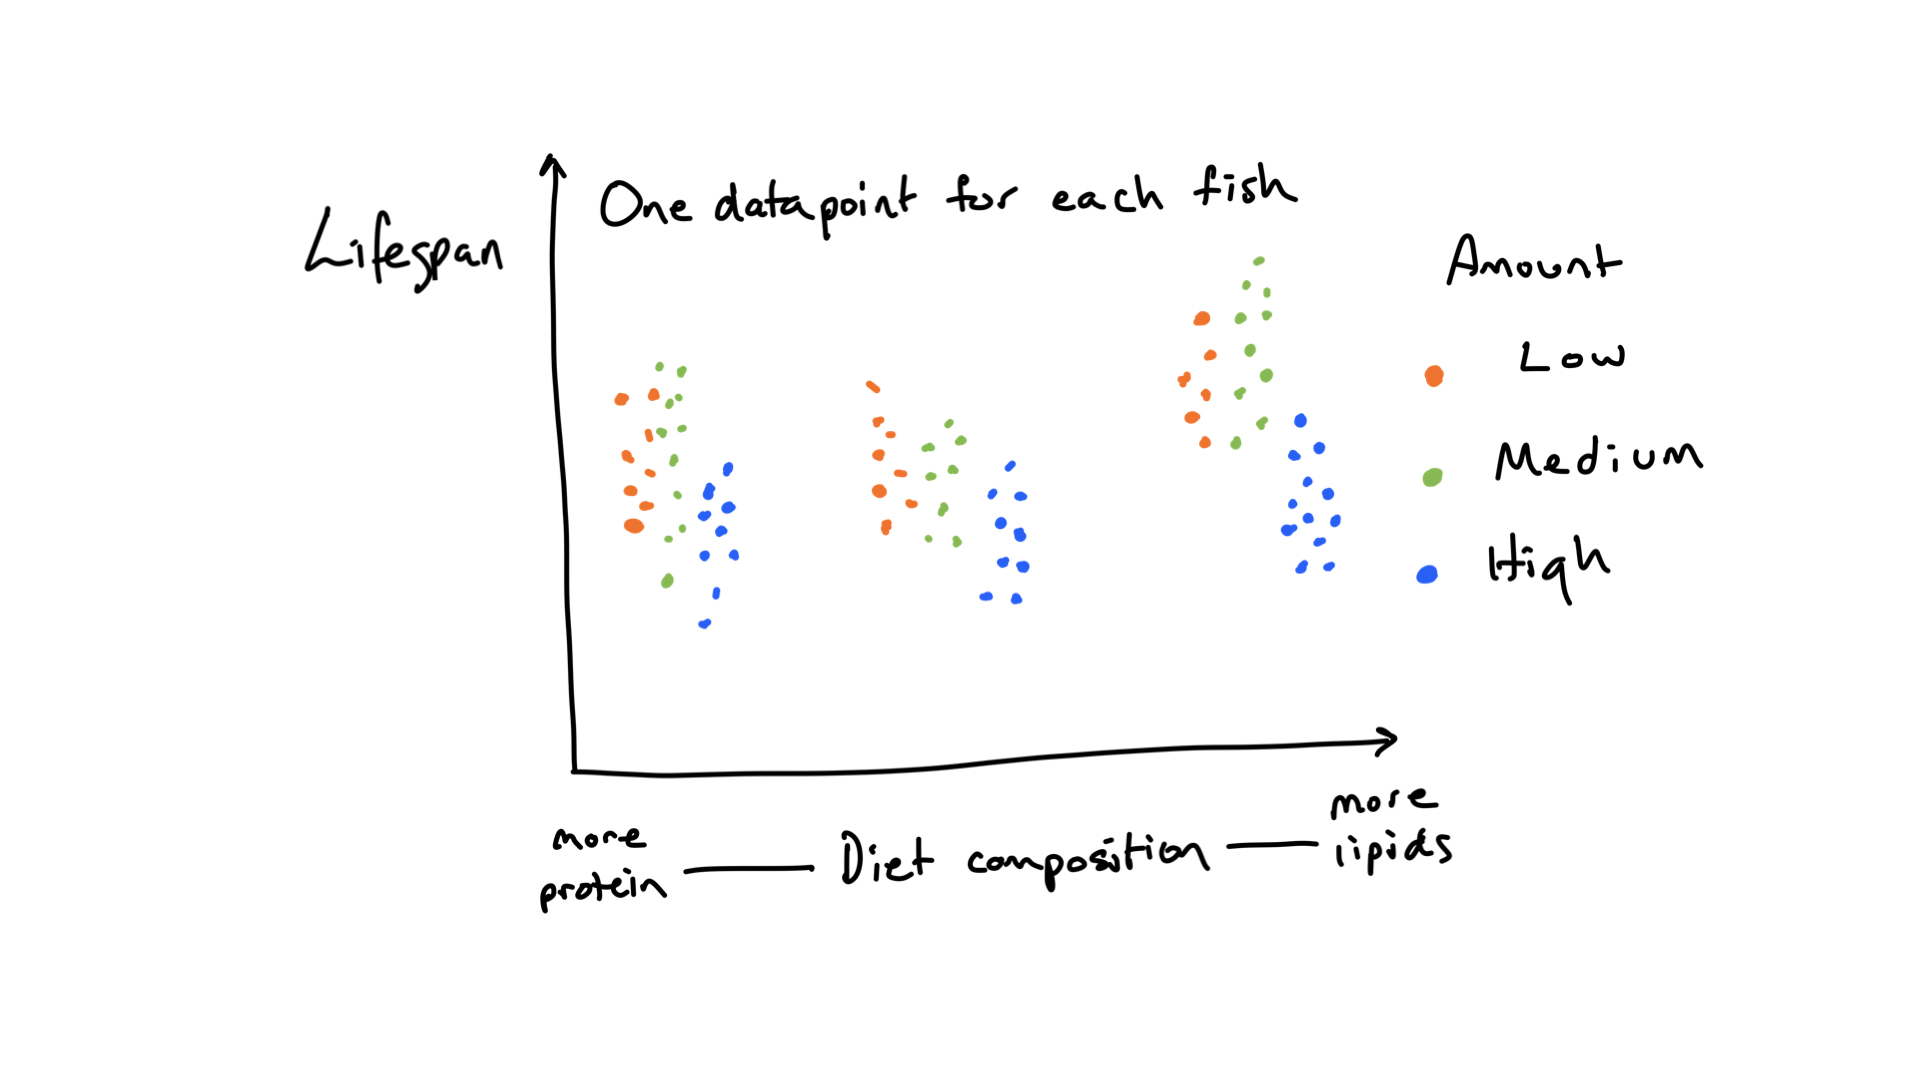 A hypothetical outcome of the demonstration study of how a manipulation of diet composition and amount affect the lifespan of fish.